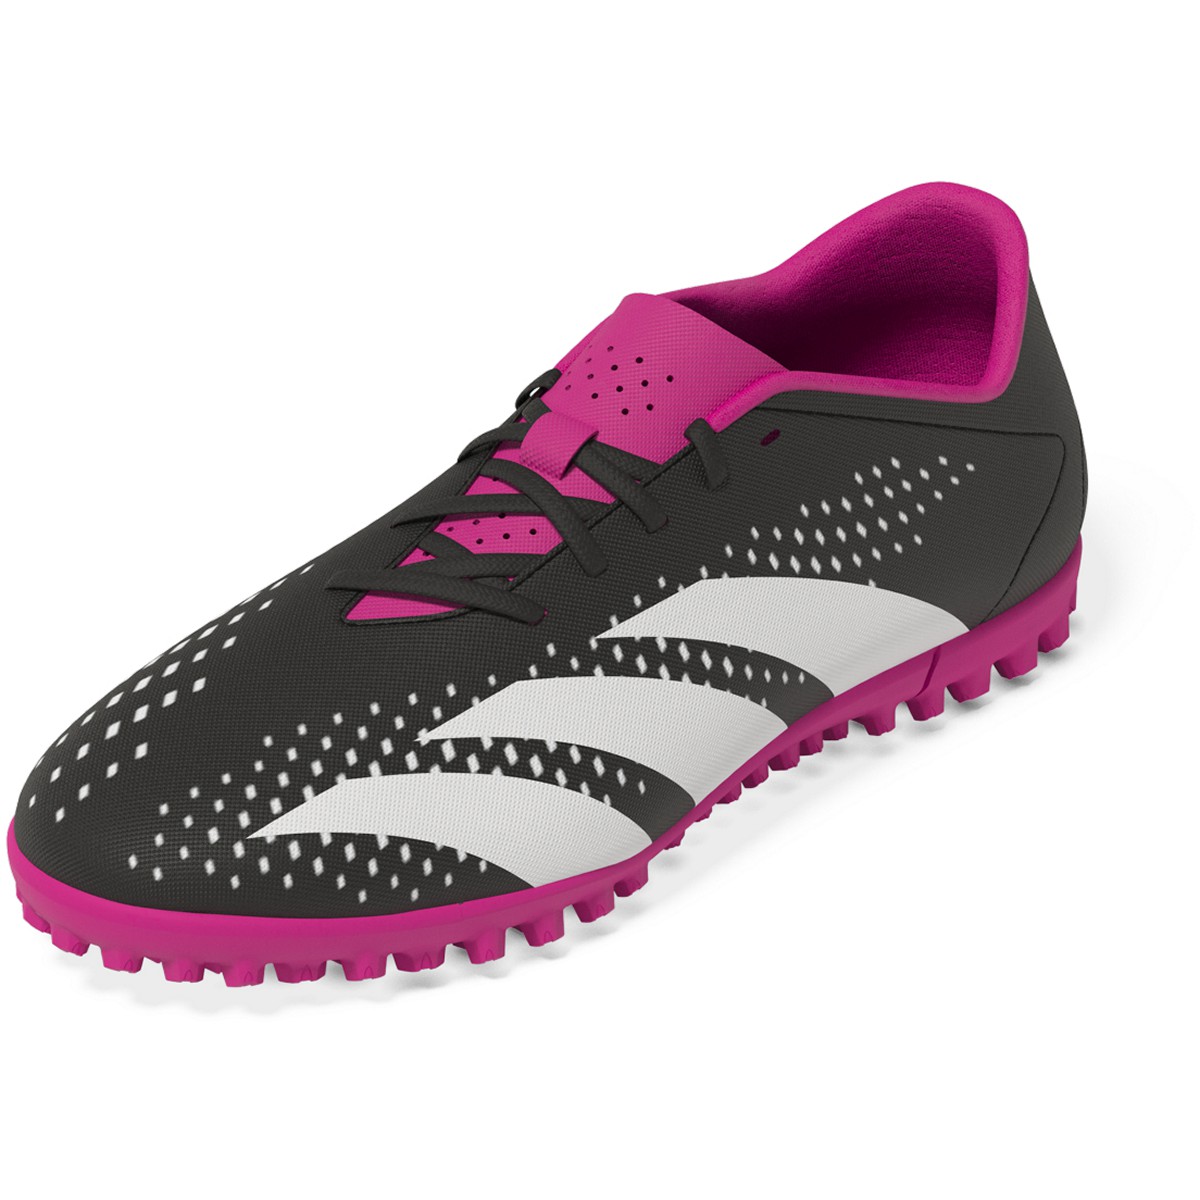 Black/White/Shock adidas Core Soccer | ACCURACY.4 Soccer Predator Shoes - Pink USA TF Unlimited Youth